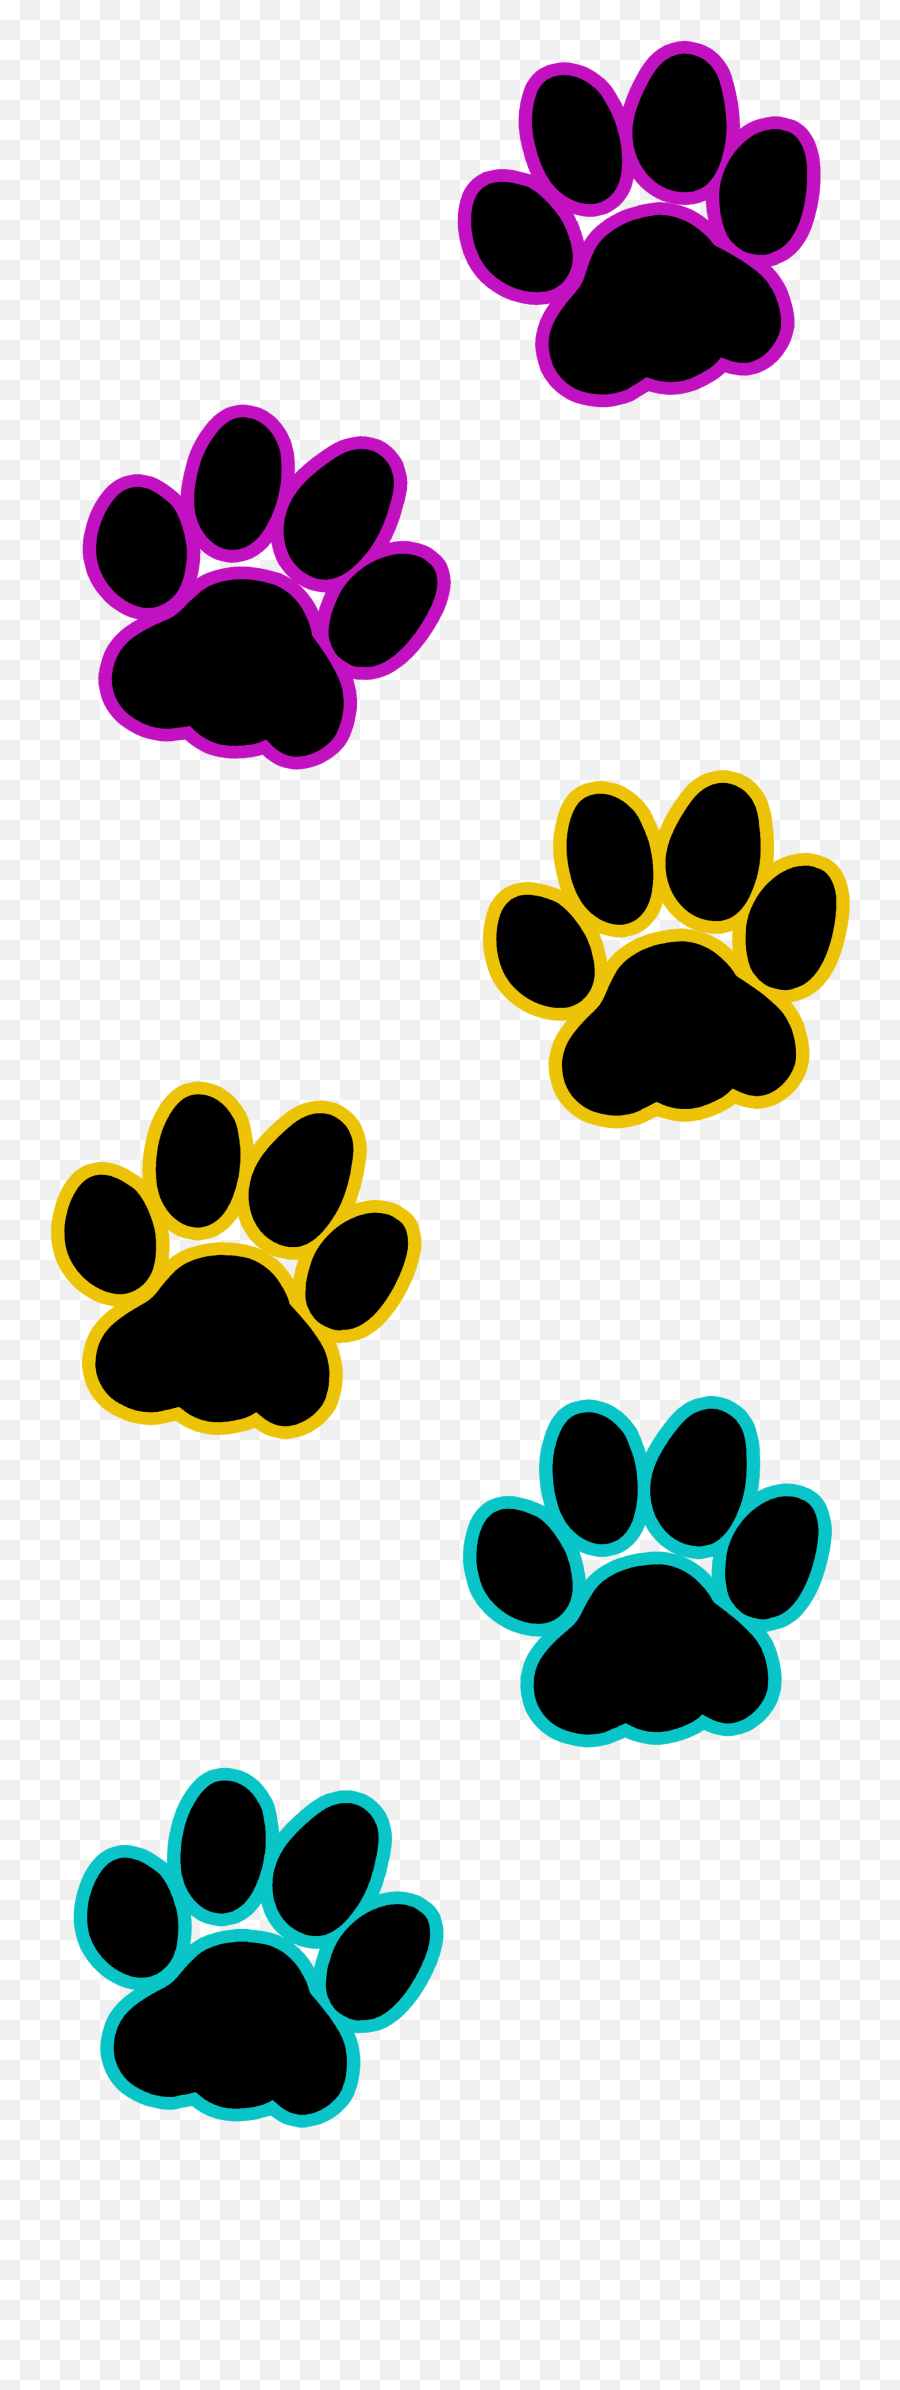 Free Mickey Mouse Head Silhouette Download Free Clip Art - Transparent Background Dog Paw Prints Clip Art Emoji,Paw Print Clipart